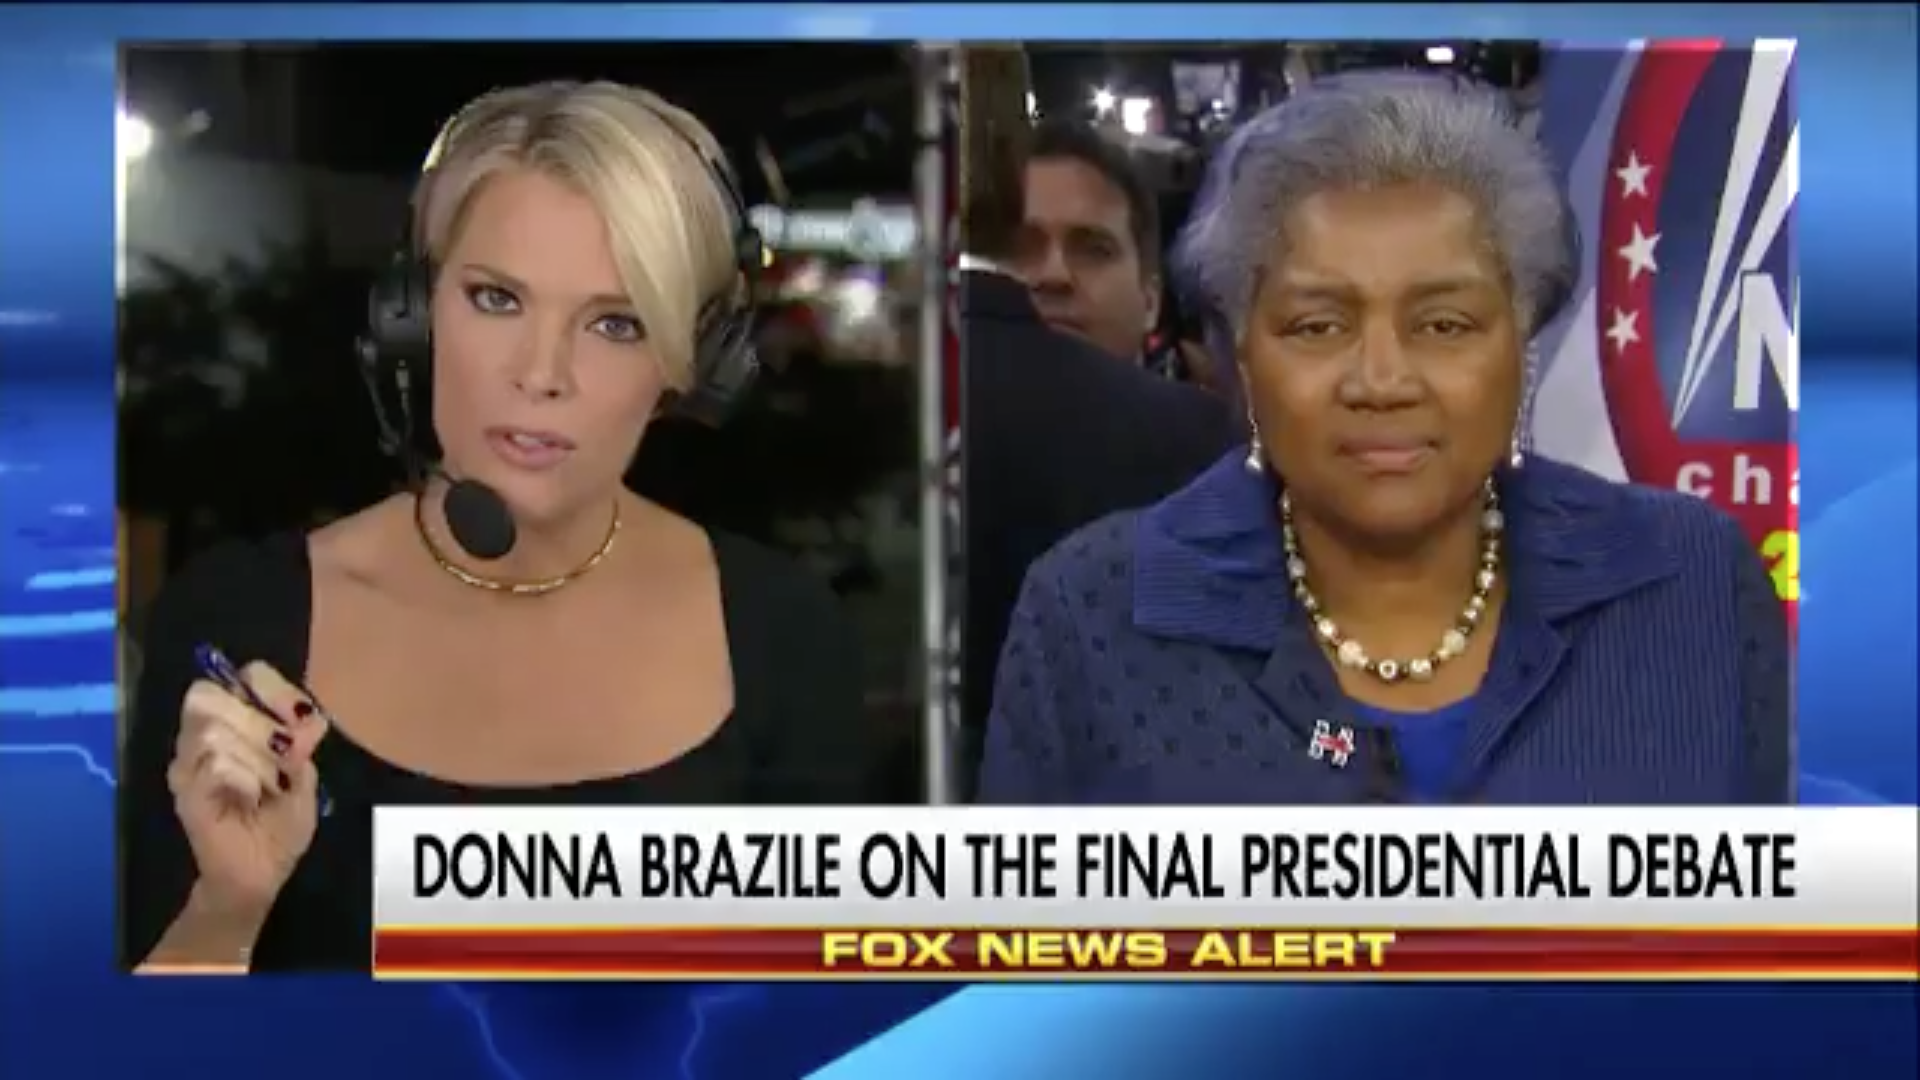 Megyn Kelly confronted Donna Brazile.